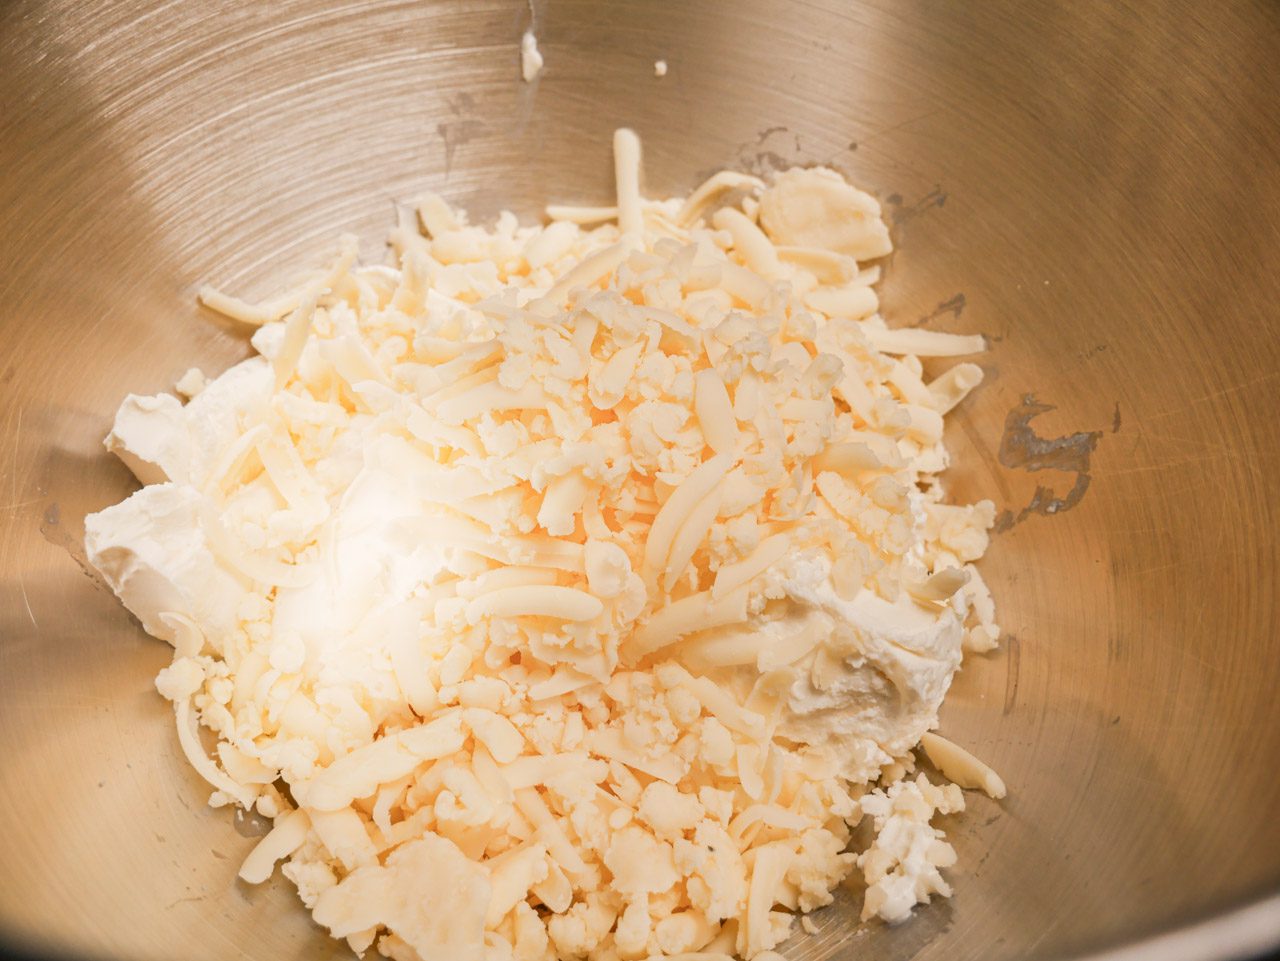 Cheddar, cream, and goat cheese in a bowl